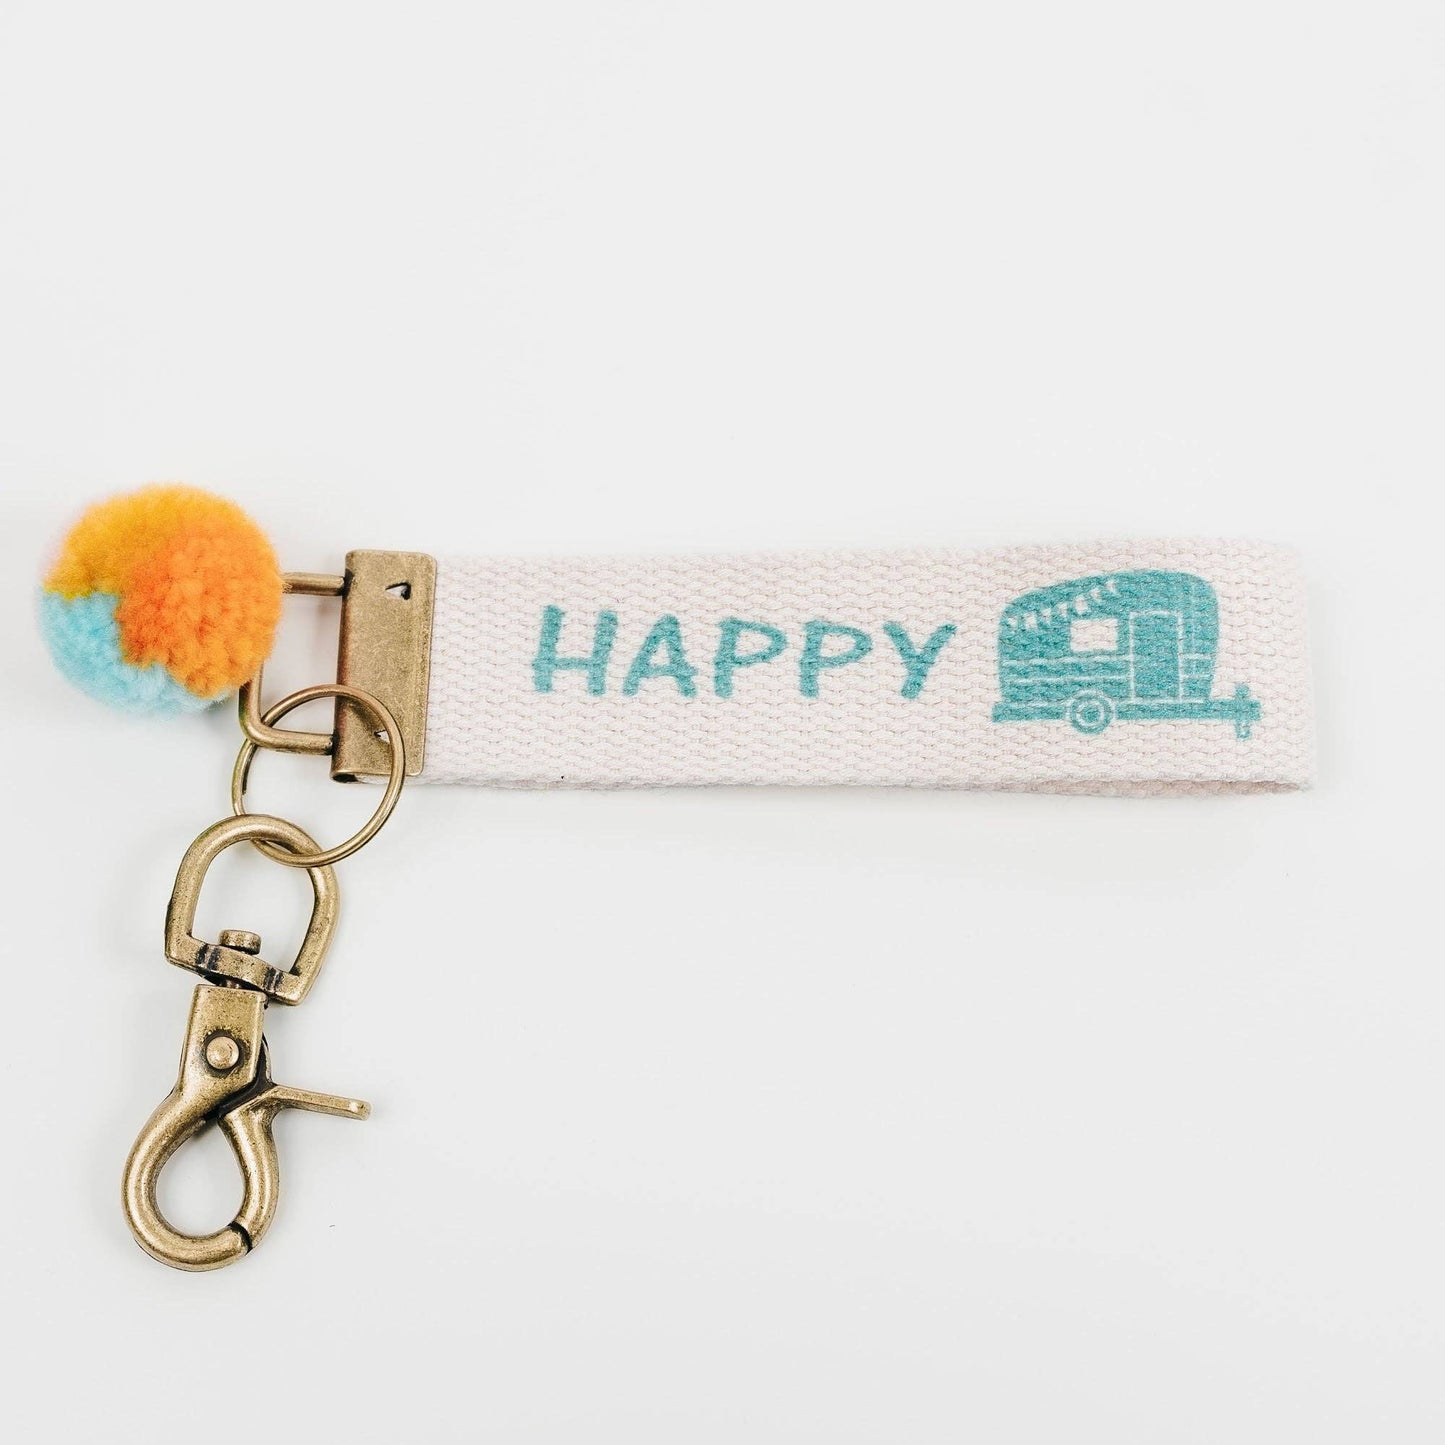 Words to Live By Canvas Keychain